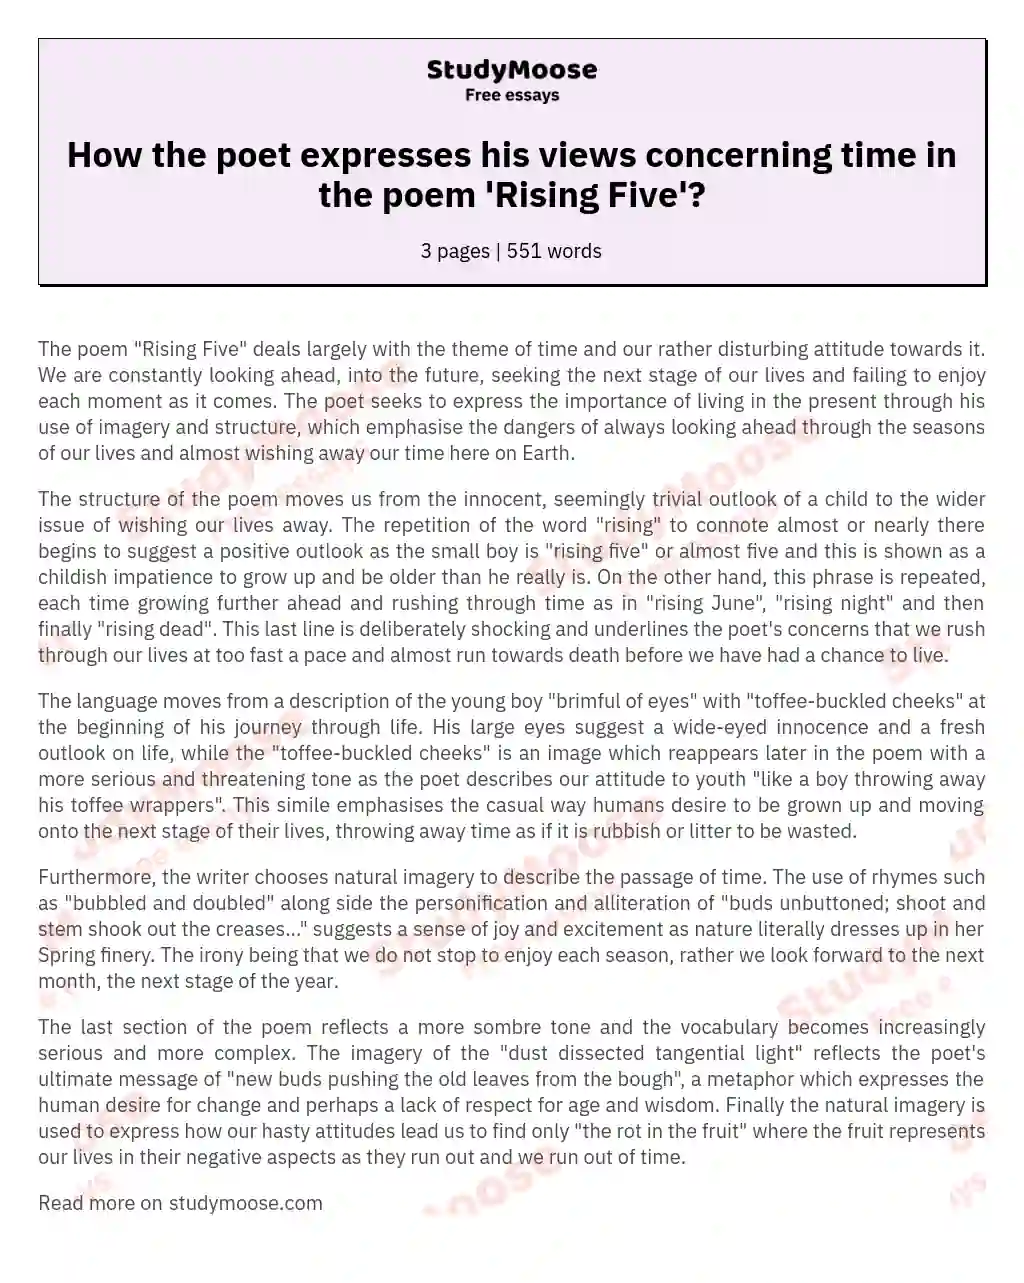 How the poet expresses his views concerning time in the poem 'Rising Five'? essay